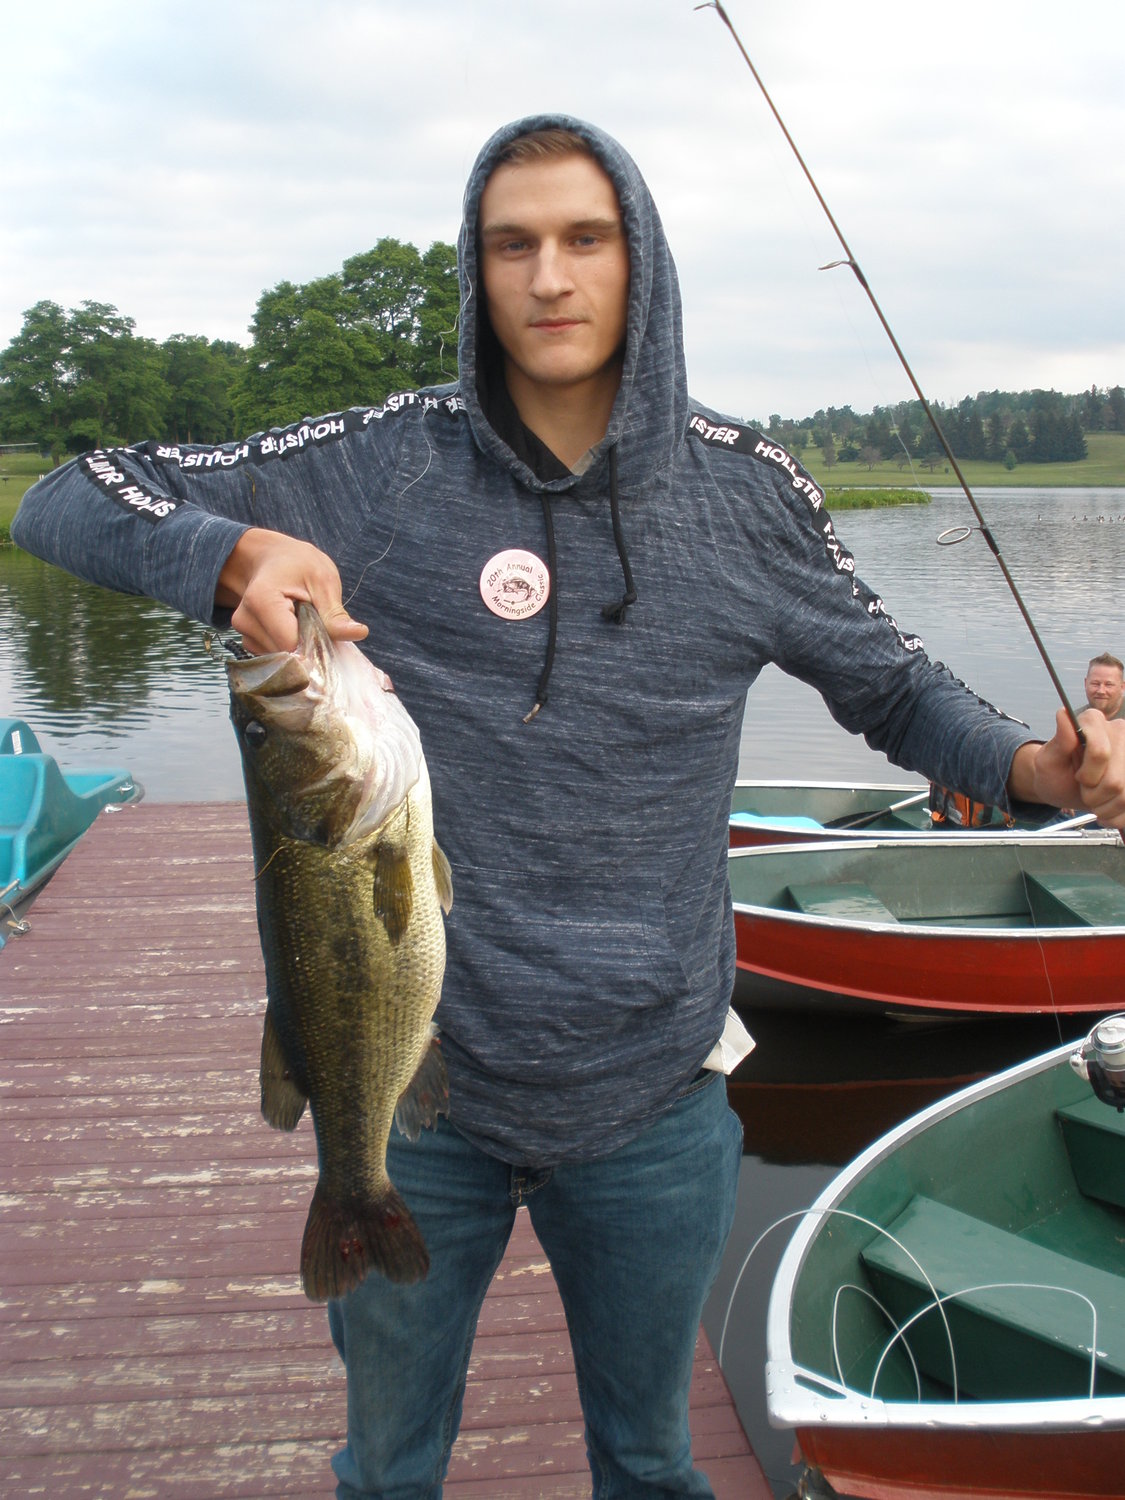 Isaiah Hannold of Grahamsville caught a 4.52-lb lunker, the biggest in that category.